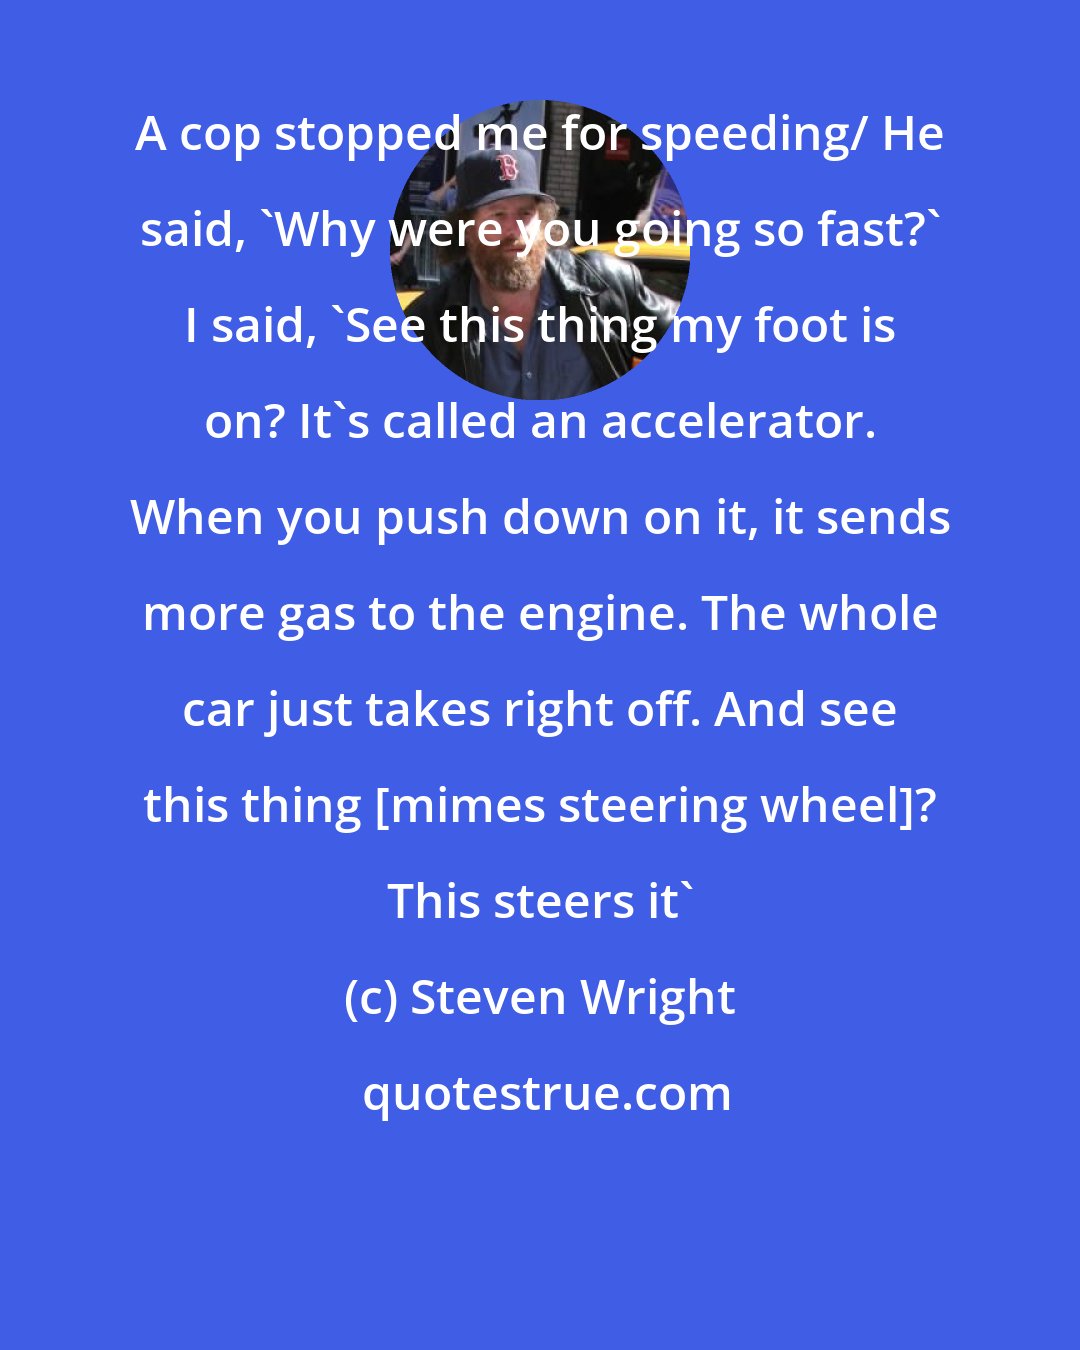 Steven Wright: A cop stopped me for speeding/ He said, 'Why were you going so fast?' I said, 'See this thing my foot is on? It's called an accelerator. When you push down on it, it sends more gas to the engine. The whole car just takes right off. And see this thing [mimes steering wheel]? This steers it'